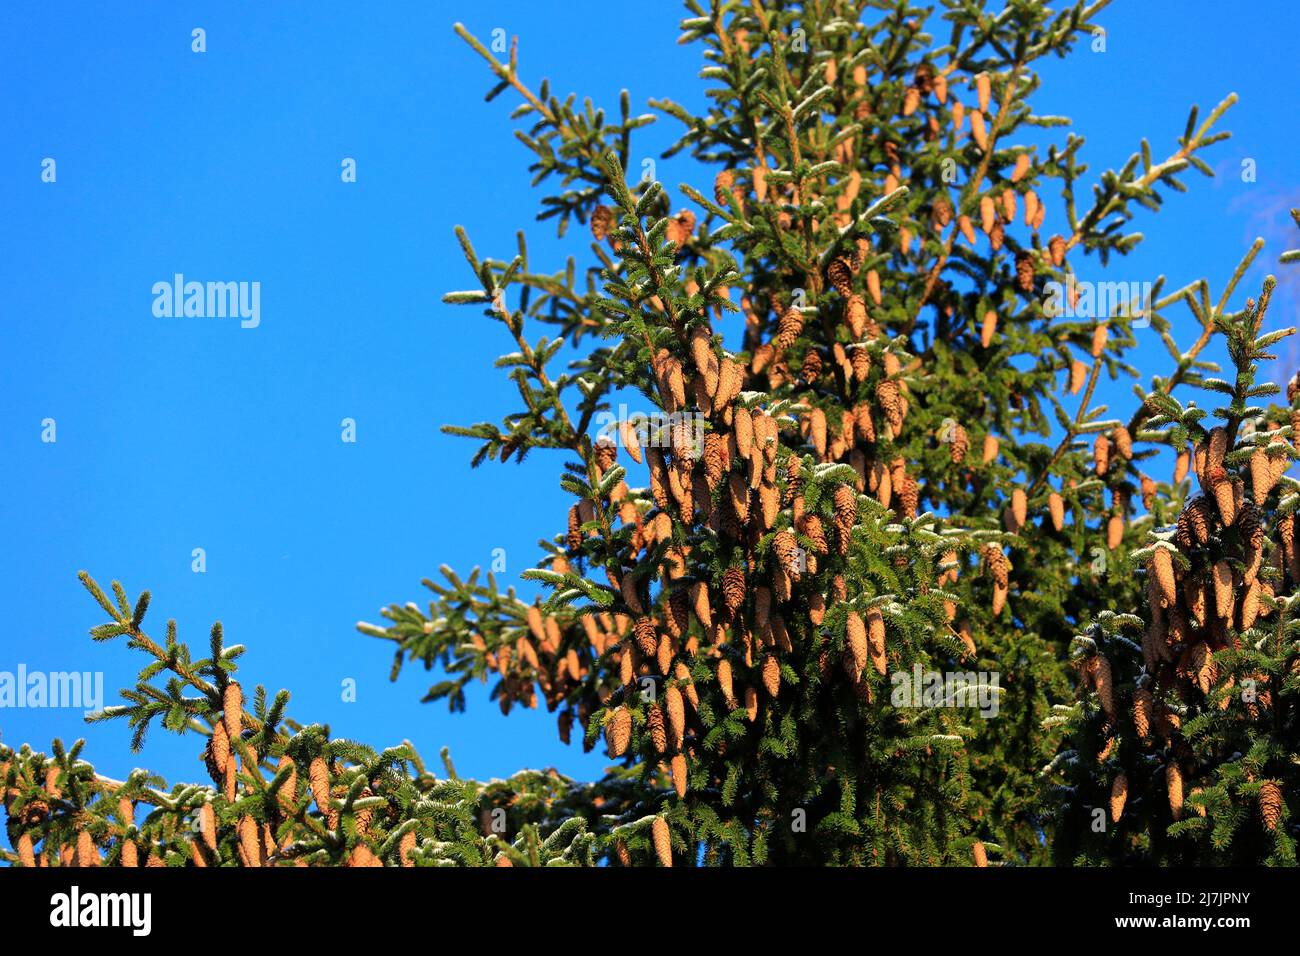 Norway spruce tree, Picea abies, growing in forest in Finland, tree top laden with cones. Blue sky background. January 2022. Stock Photo